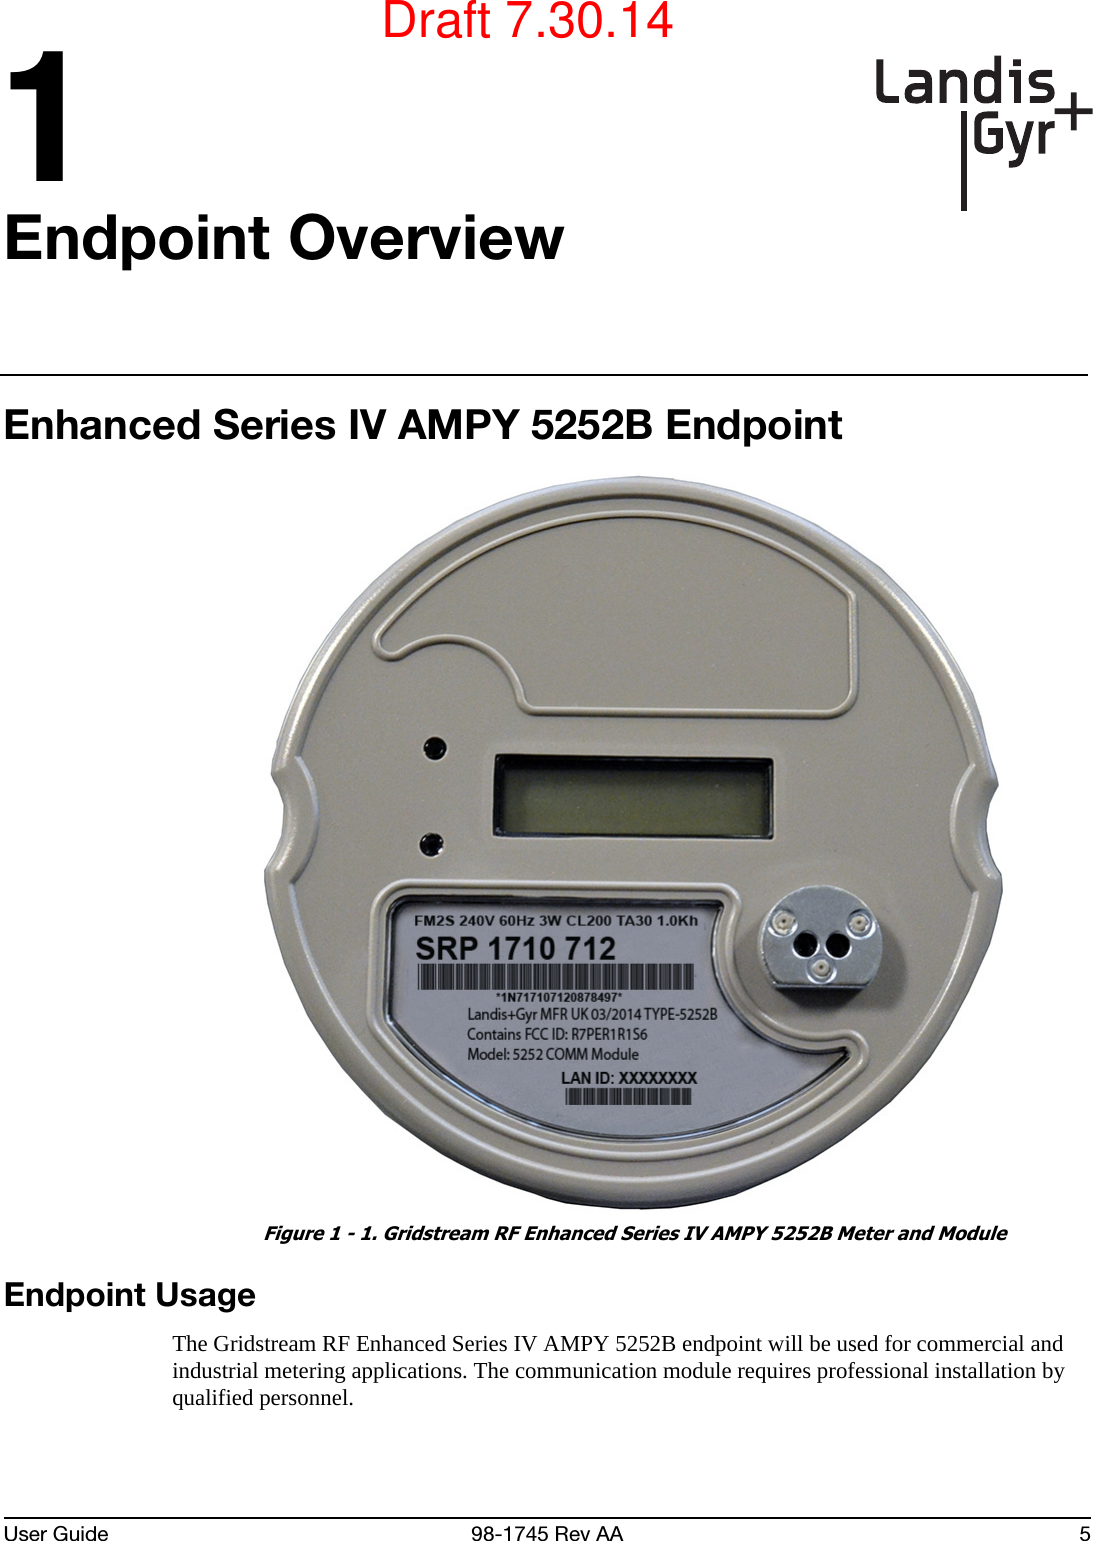 User Guide 98-1745 Rev AA 51Endpoint OverviewEnhanced Series IV AMPY 5252B Endpoint Figure 1 - 1. Gridstream RF Enhanced Series IV AMPY 5252B Meter and ModuleEndpoint UsageThe Gridstream RF Enhanced Series IV AMPY 5252B endpoint will be used for commercial and industrial metering applications. The communication module requires professional installation by qualified personnel.Draft 7.30.14